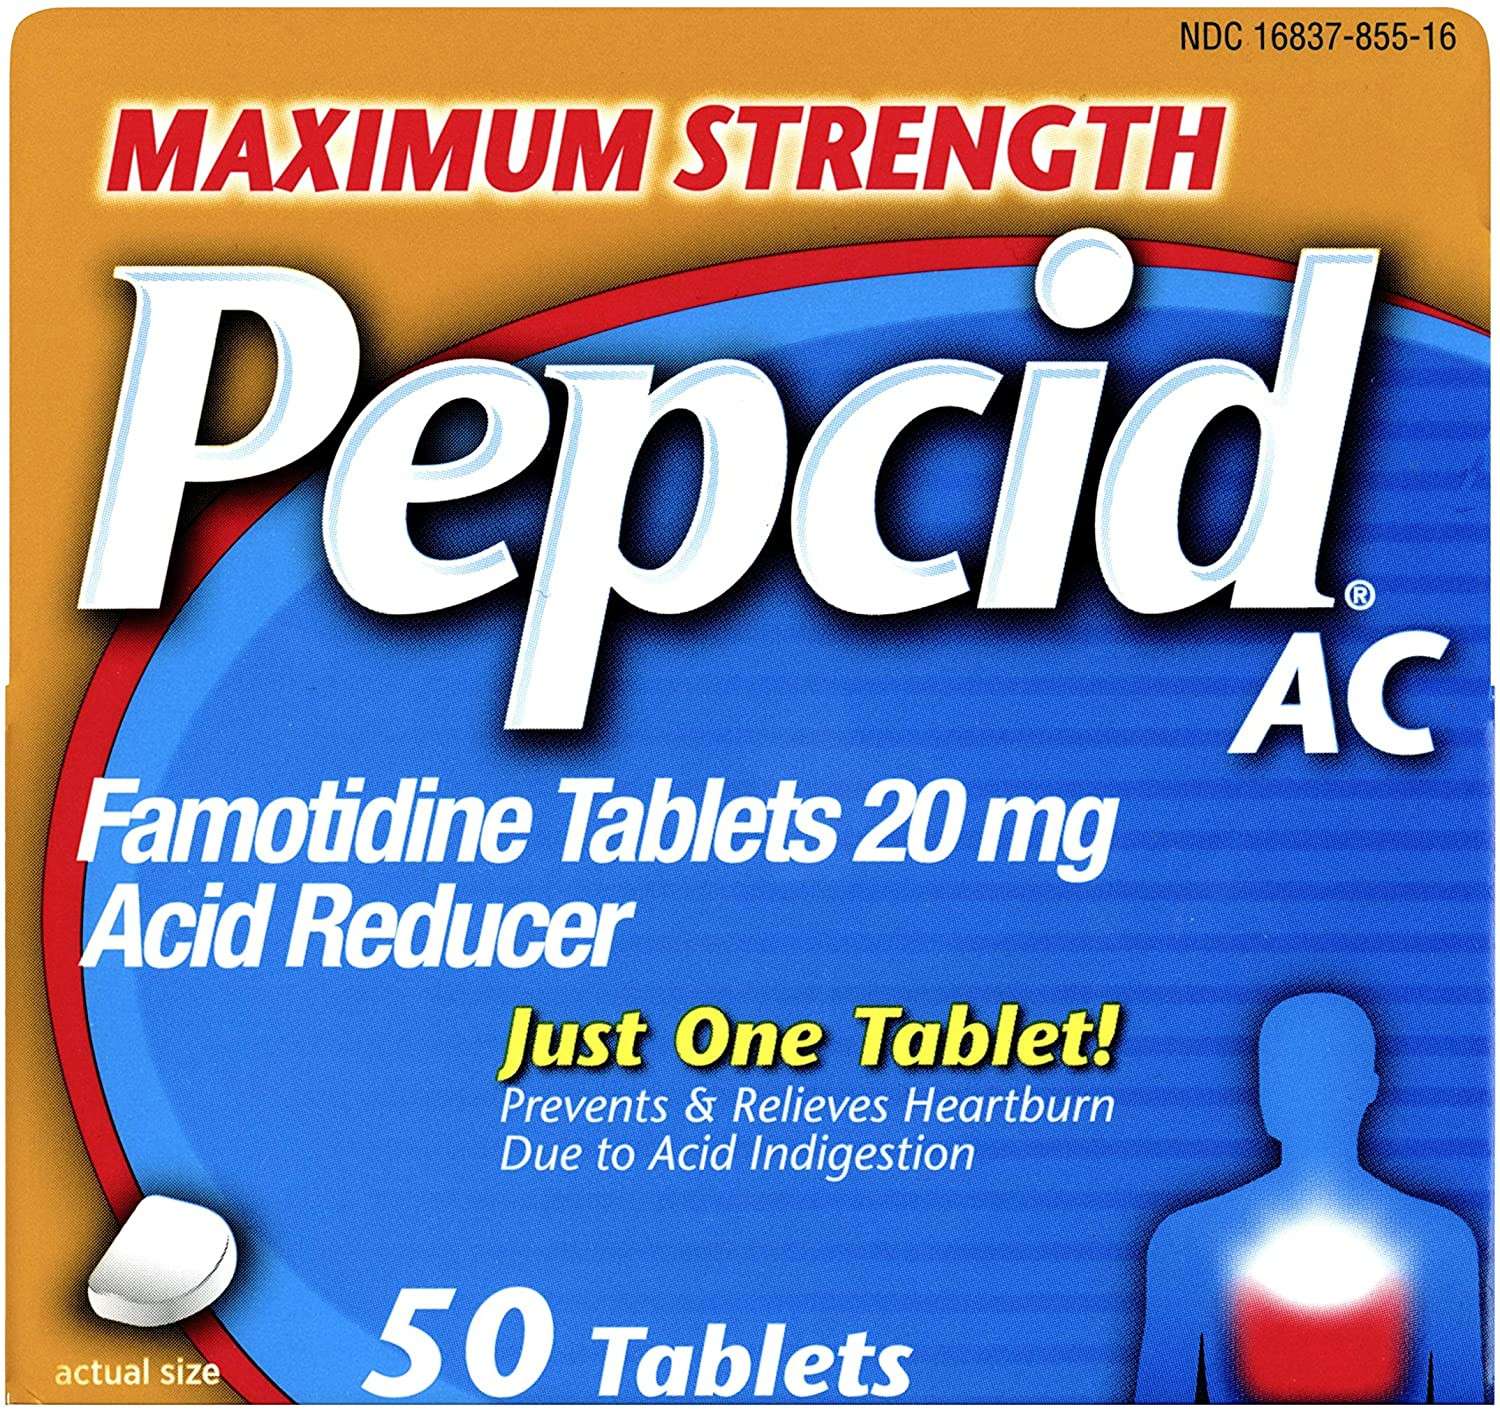 Pepcid Reviews, Price, Coupons, Where to Buy Pepcid ...